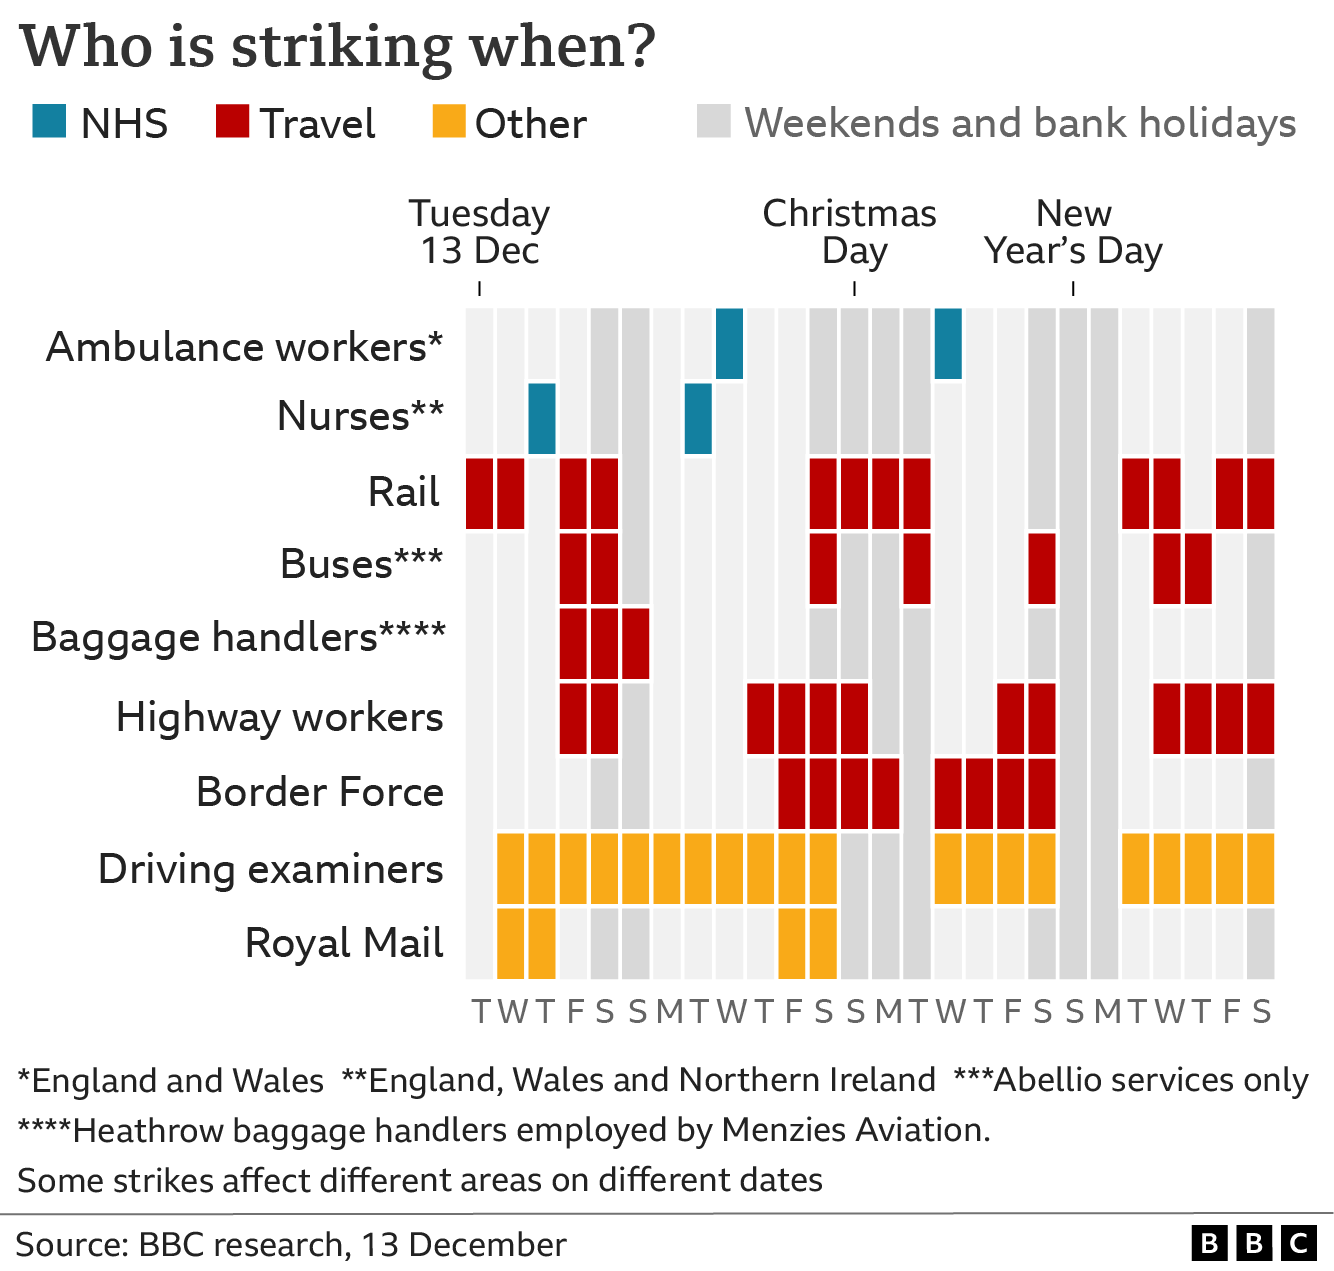 Graphic which shows those going on strike in the next month - inluding ambulance workers in England and Wales, nurses, health workers in Northern Ireland, rail workers, Abellio buses, some Heathrow baggage handlers, highway workers, border force workers, driving examiners and Royal Mail. (13 Dec).